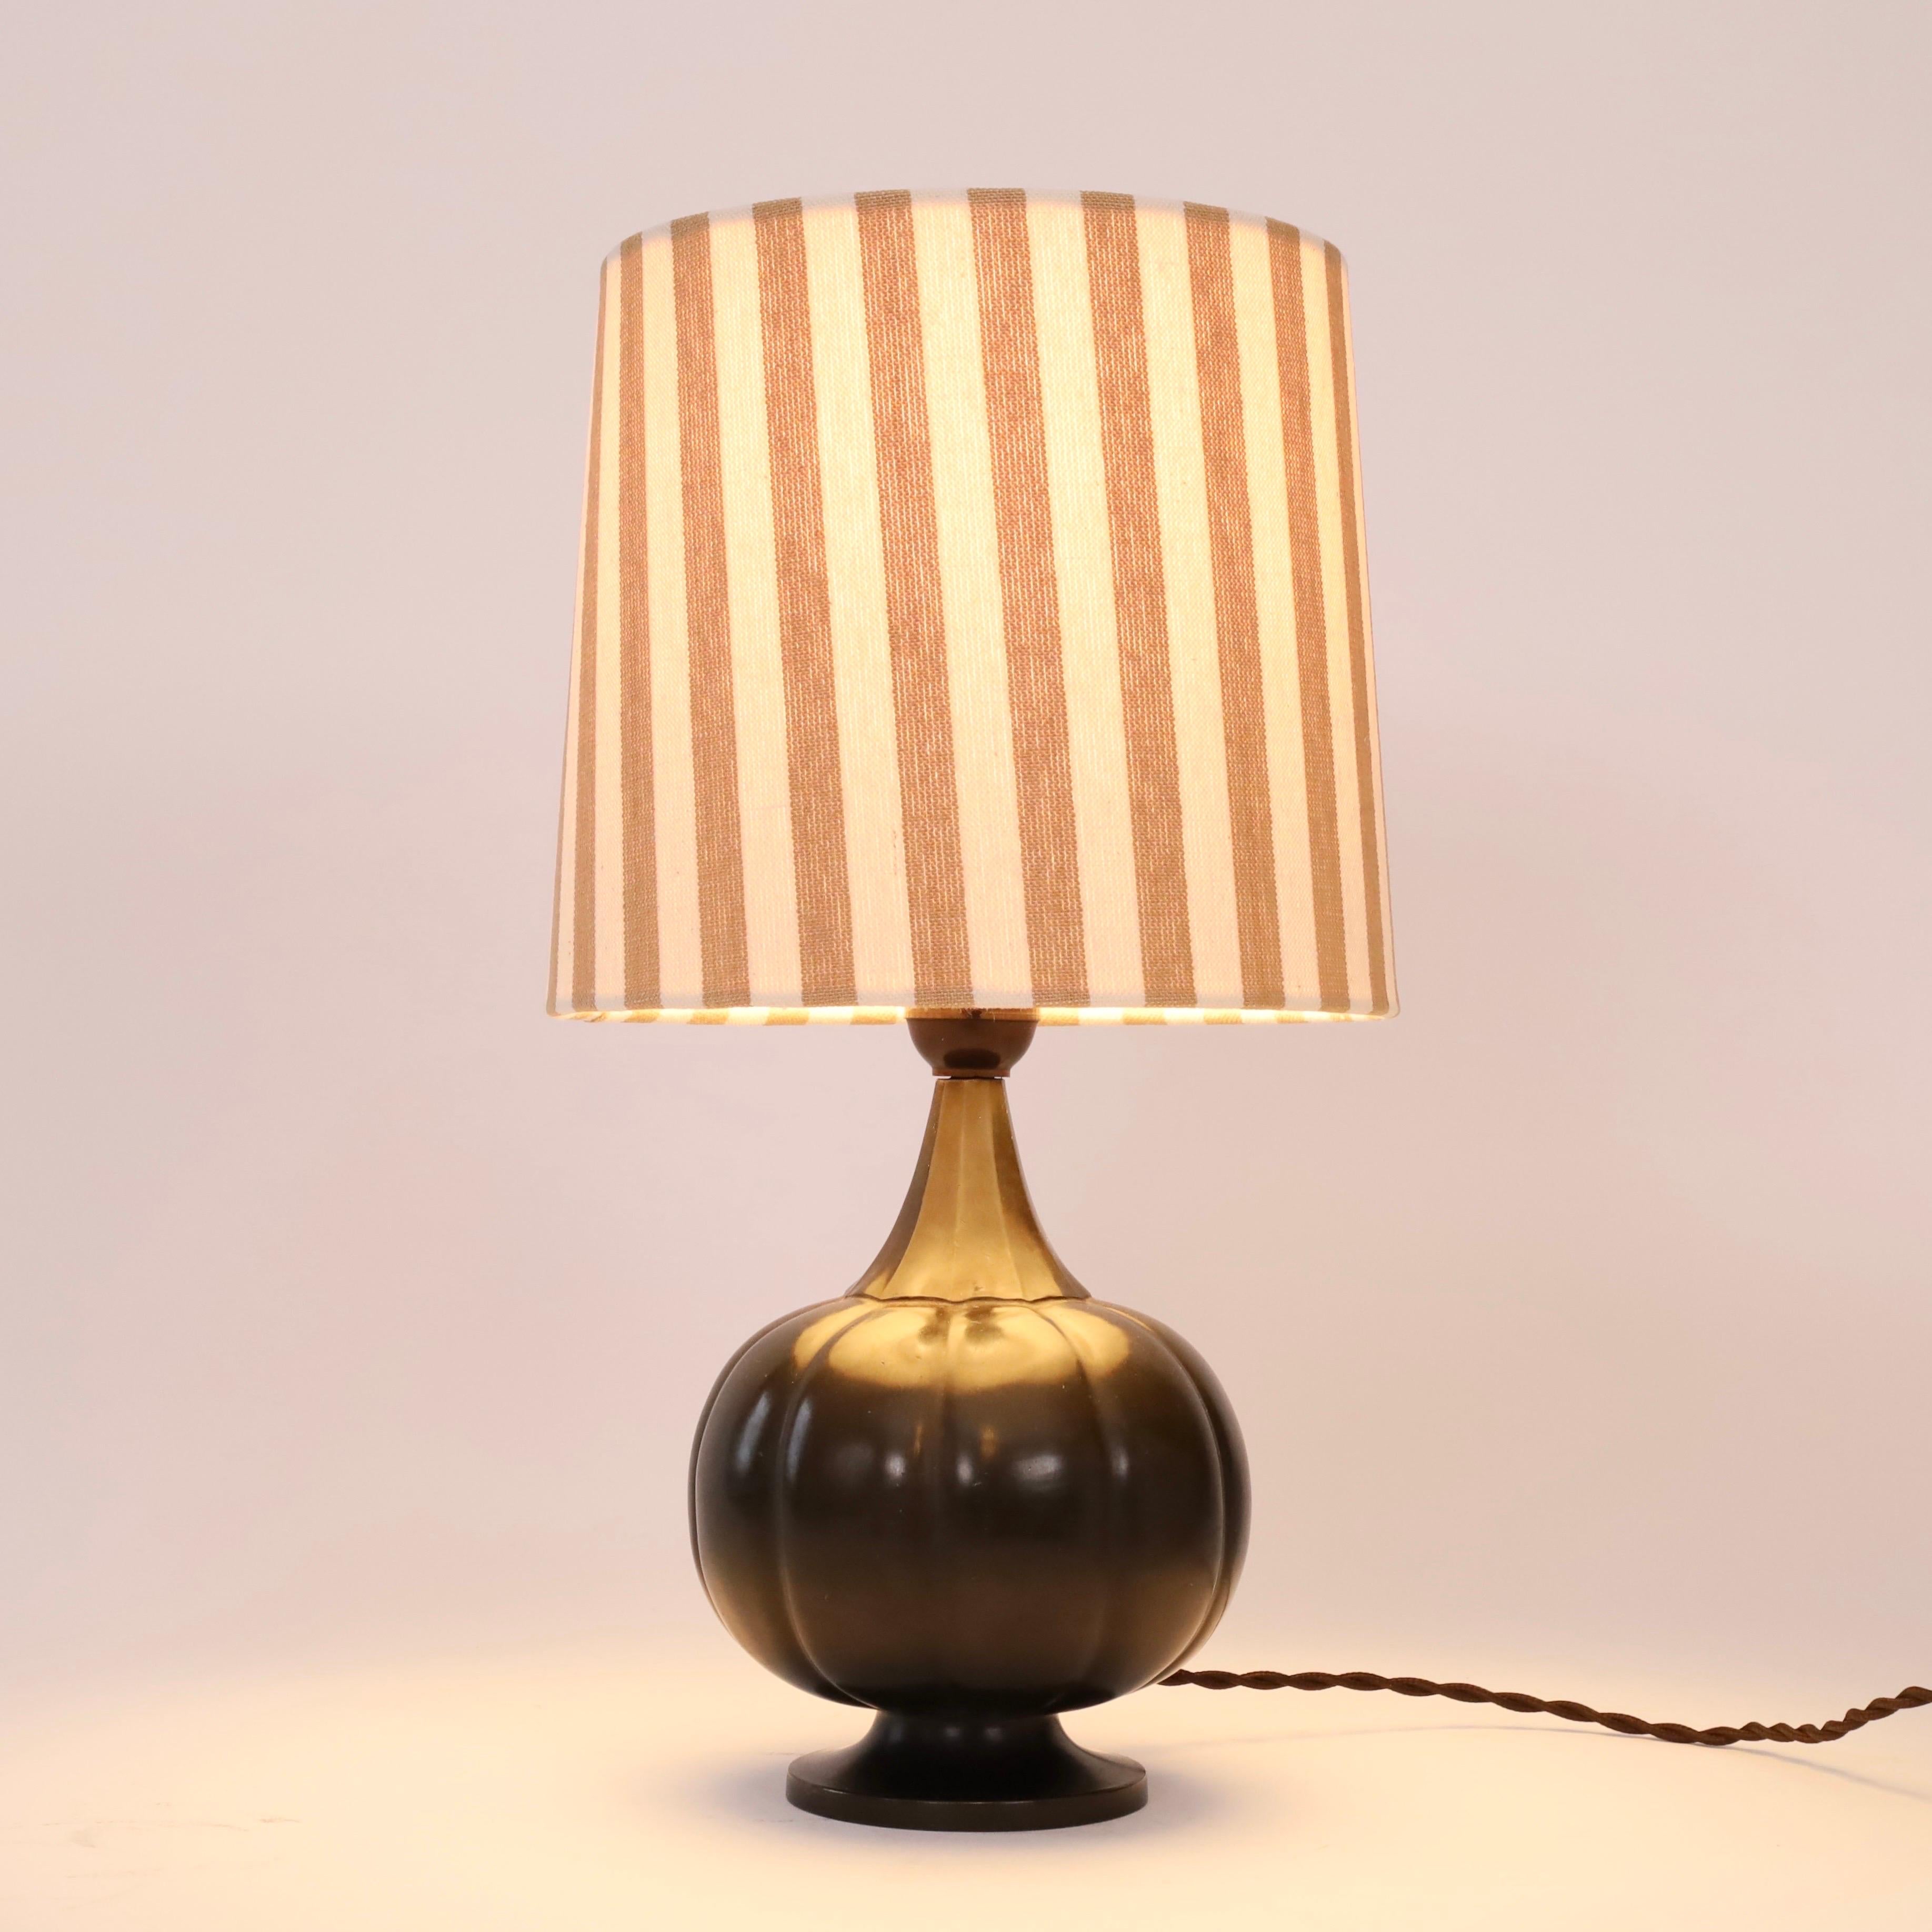 Set of round Just Andersen Table Lamps, 1920s, Denmark For Sale 1